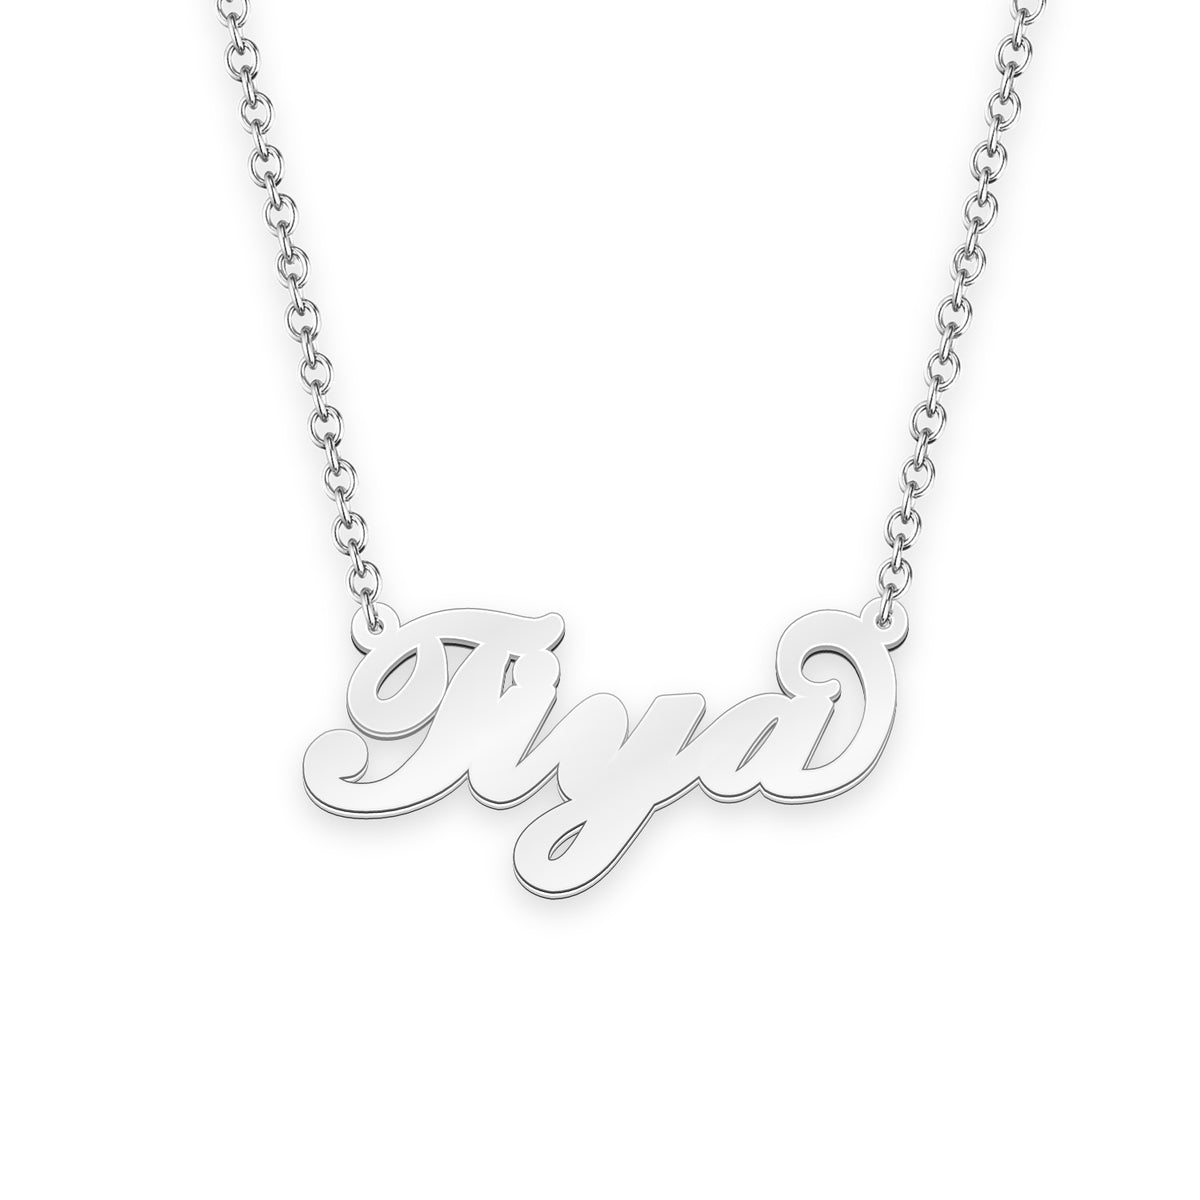 Stainless Steel Silver Gold Black Rose Gold Color Baby Name Tiya Engraved Personalized Gifts For Son Daughter Boyfriend Girlfriend Initial Customizable Pendant Necklace Dog Tags 24 Ball Chain